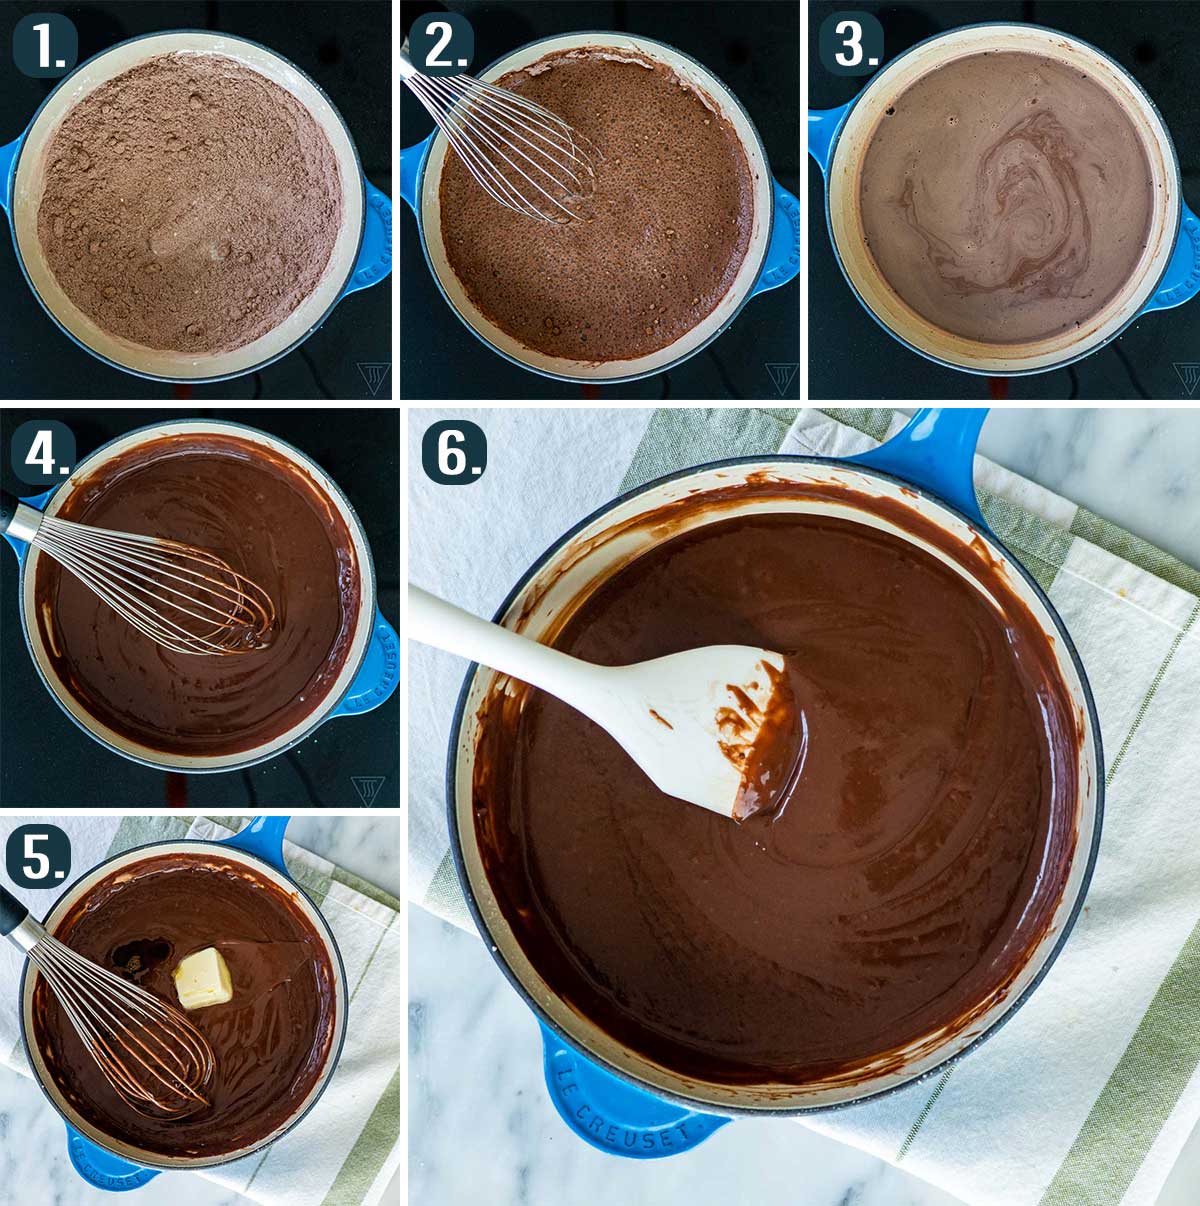 detailed process shots showing how to make chocolate pudding from scratch